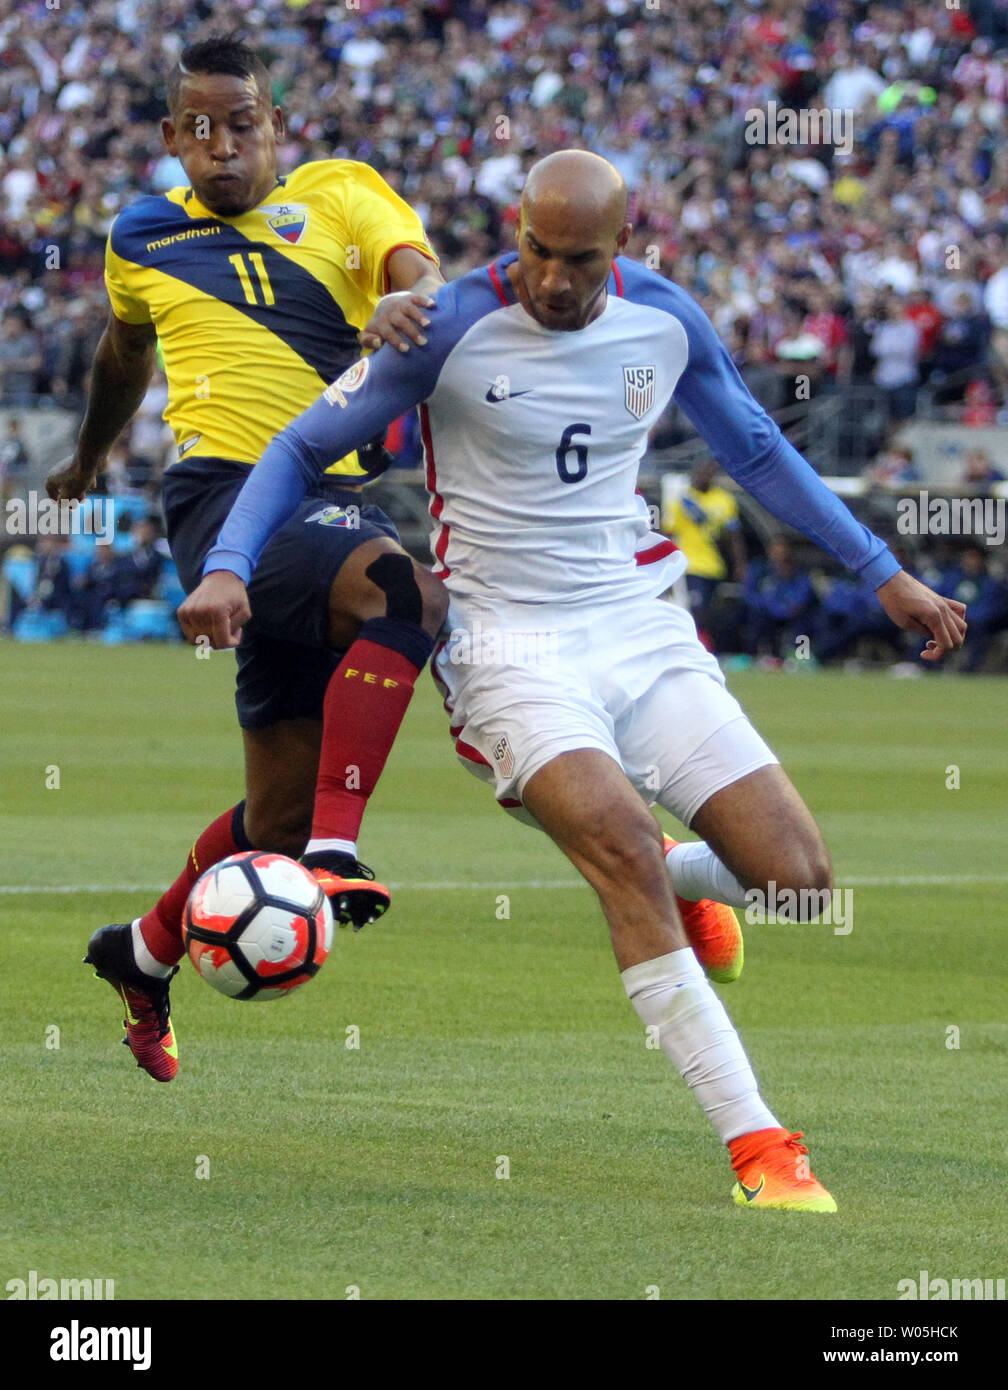 USA's John Brooks (6) is shoved from behind by  Ecuador's Michael Arroyo (11) in a 2016 Copa America Centenario soccer quarterfinals at CenturyLink Field in Seattle, Washington on June 16, 2016.     USA beat Ecuador 2-1 to advance to the semi-finals.    Photo by Jim Bryant/ UPI Stock Photo